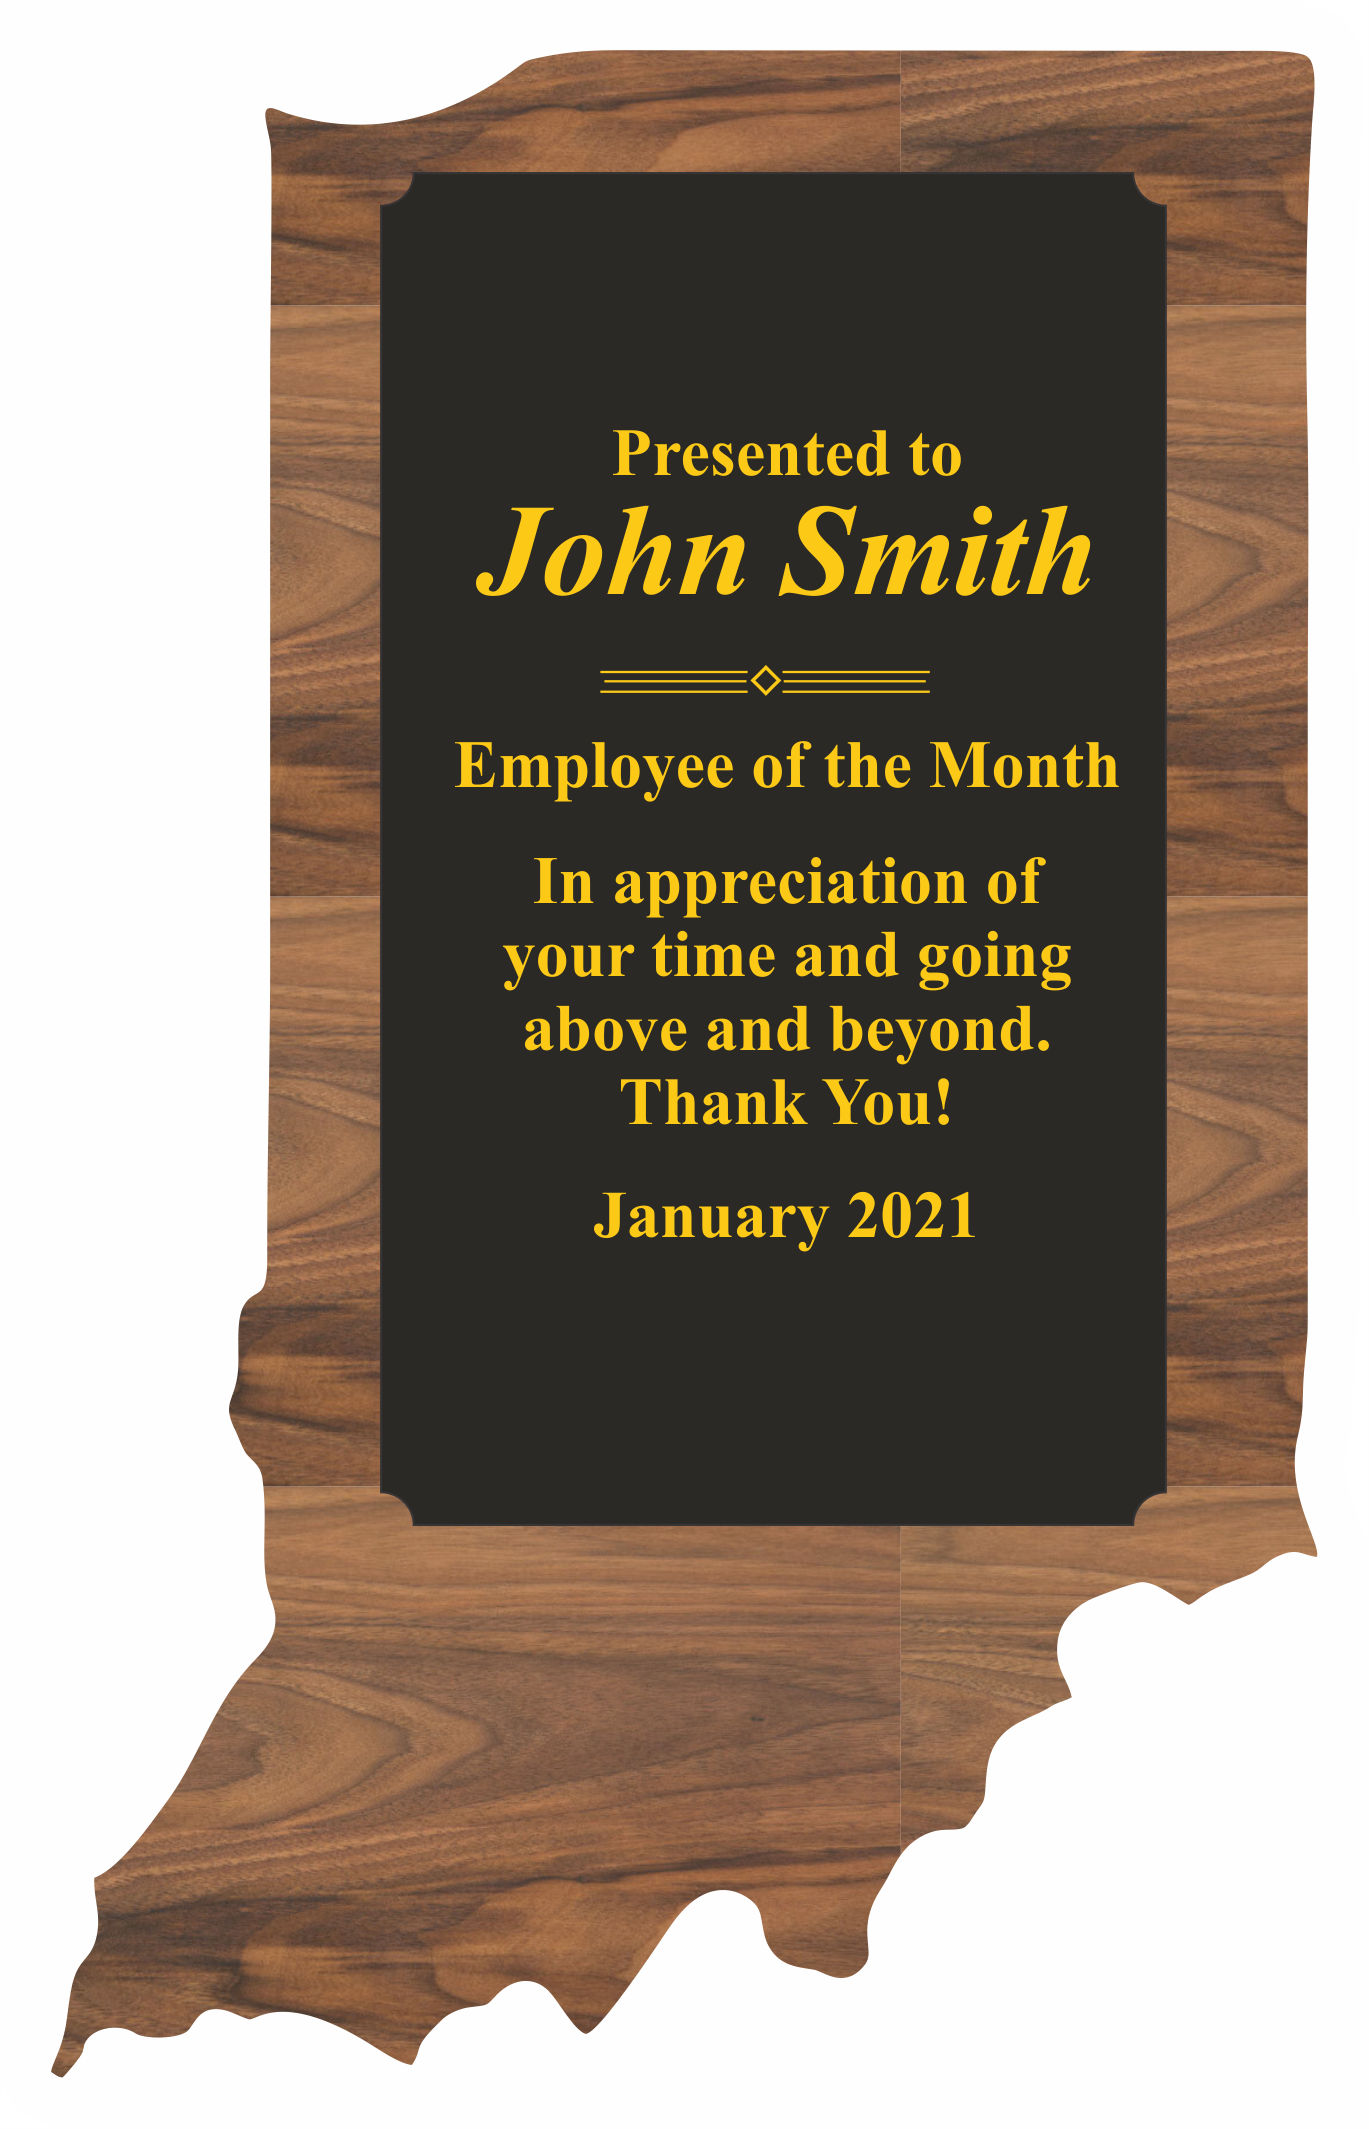 Indiana State Shaped Plaques, Custom Engraved With Your Logo!